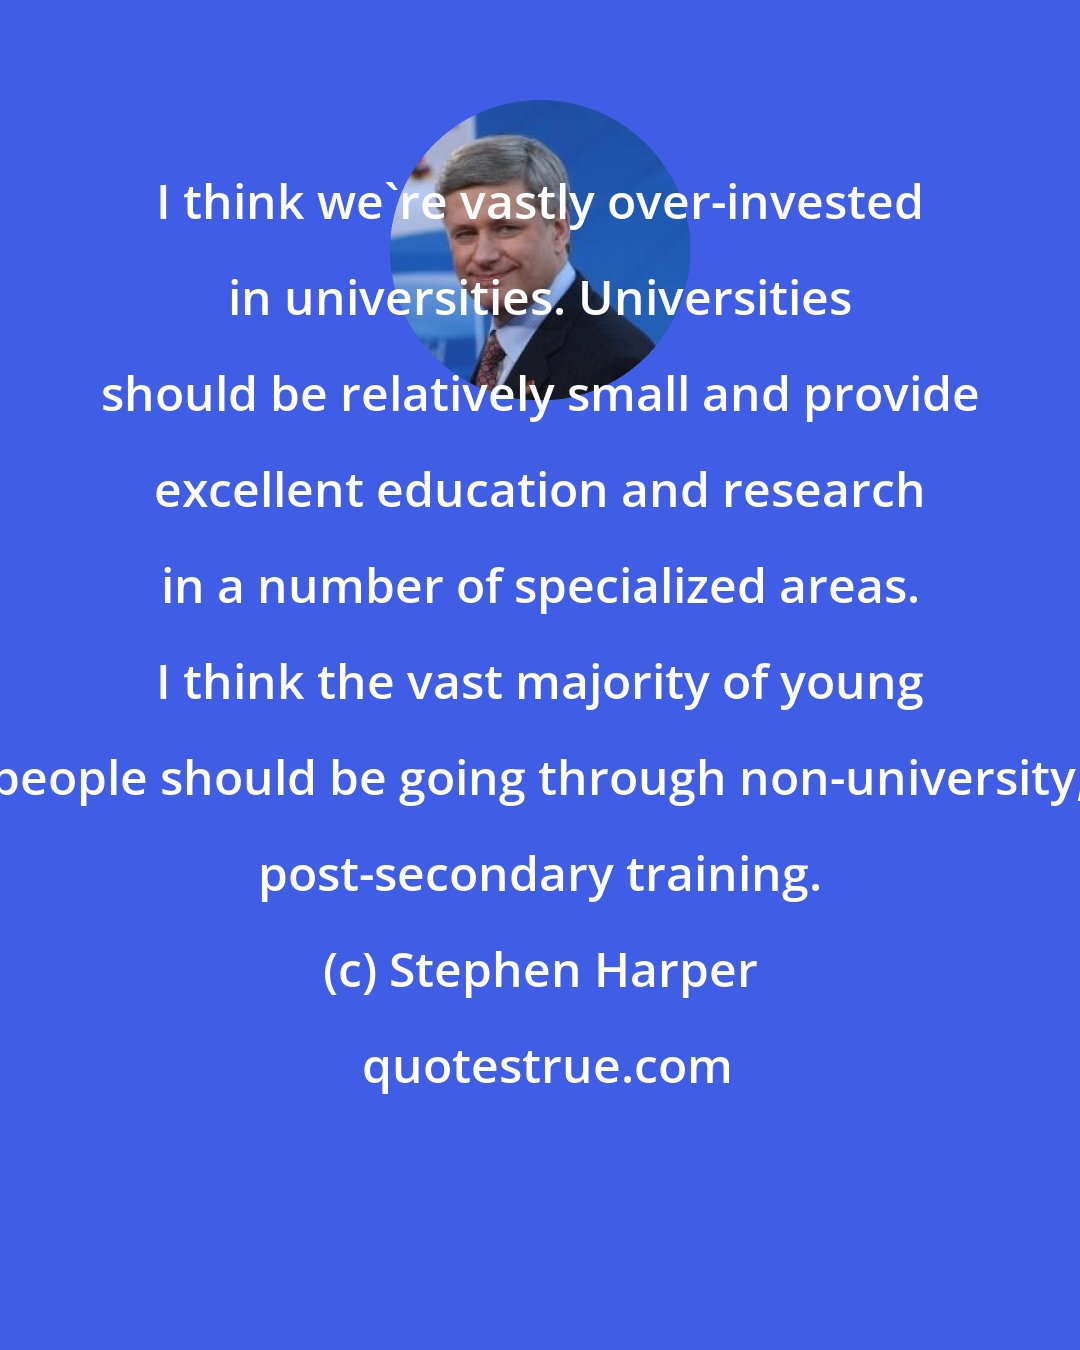 Stephen Harper: I think we're vastly over-invested in universities. Universities should be relatively small and provide excellent education and research in a number of specialized areas. I think the vast majority of young people should be going through non-university, post-secondary training.